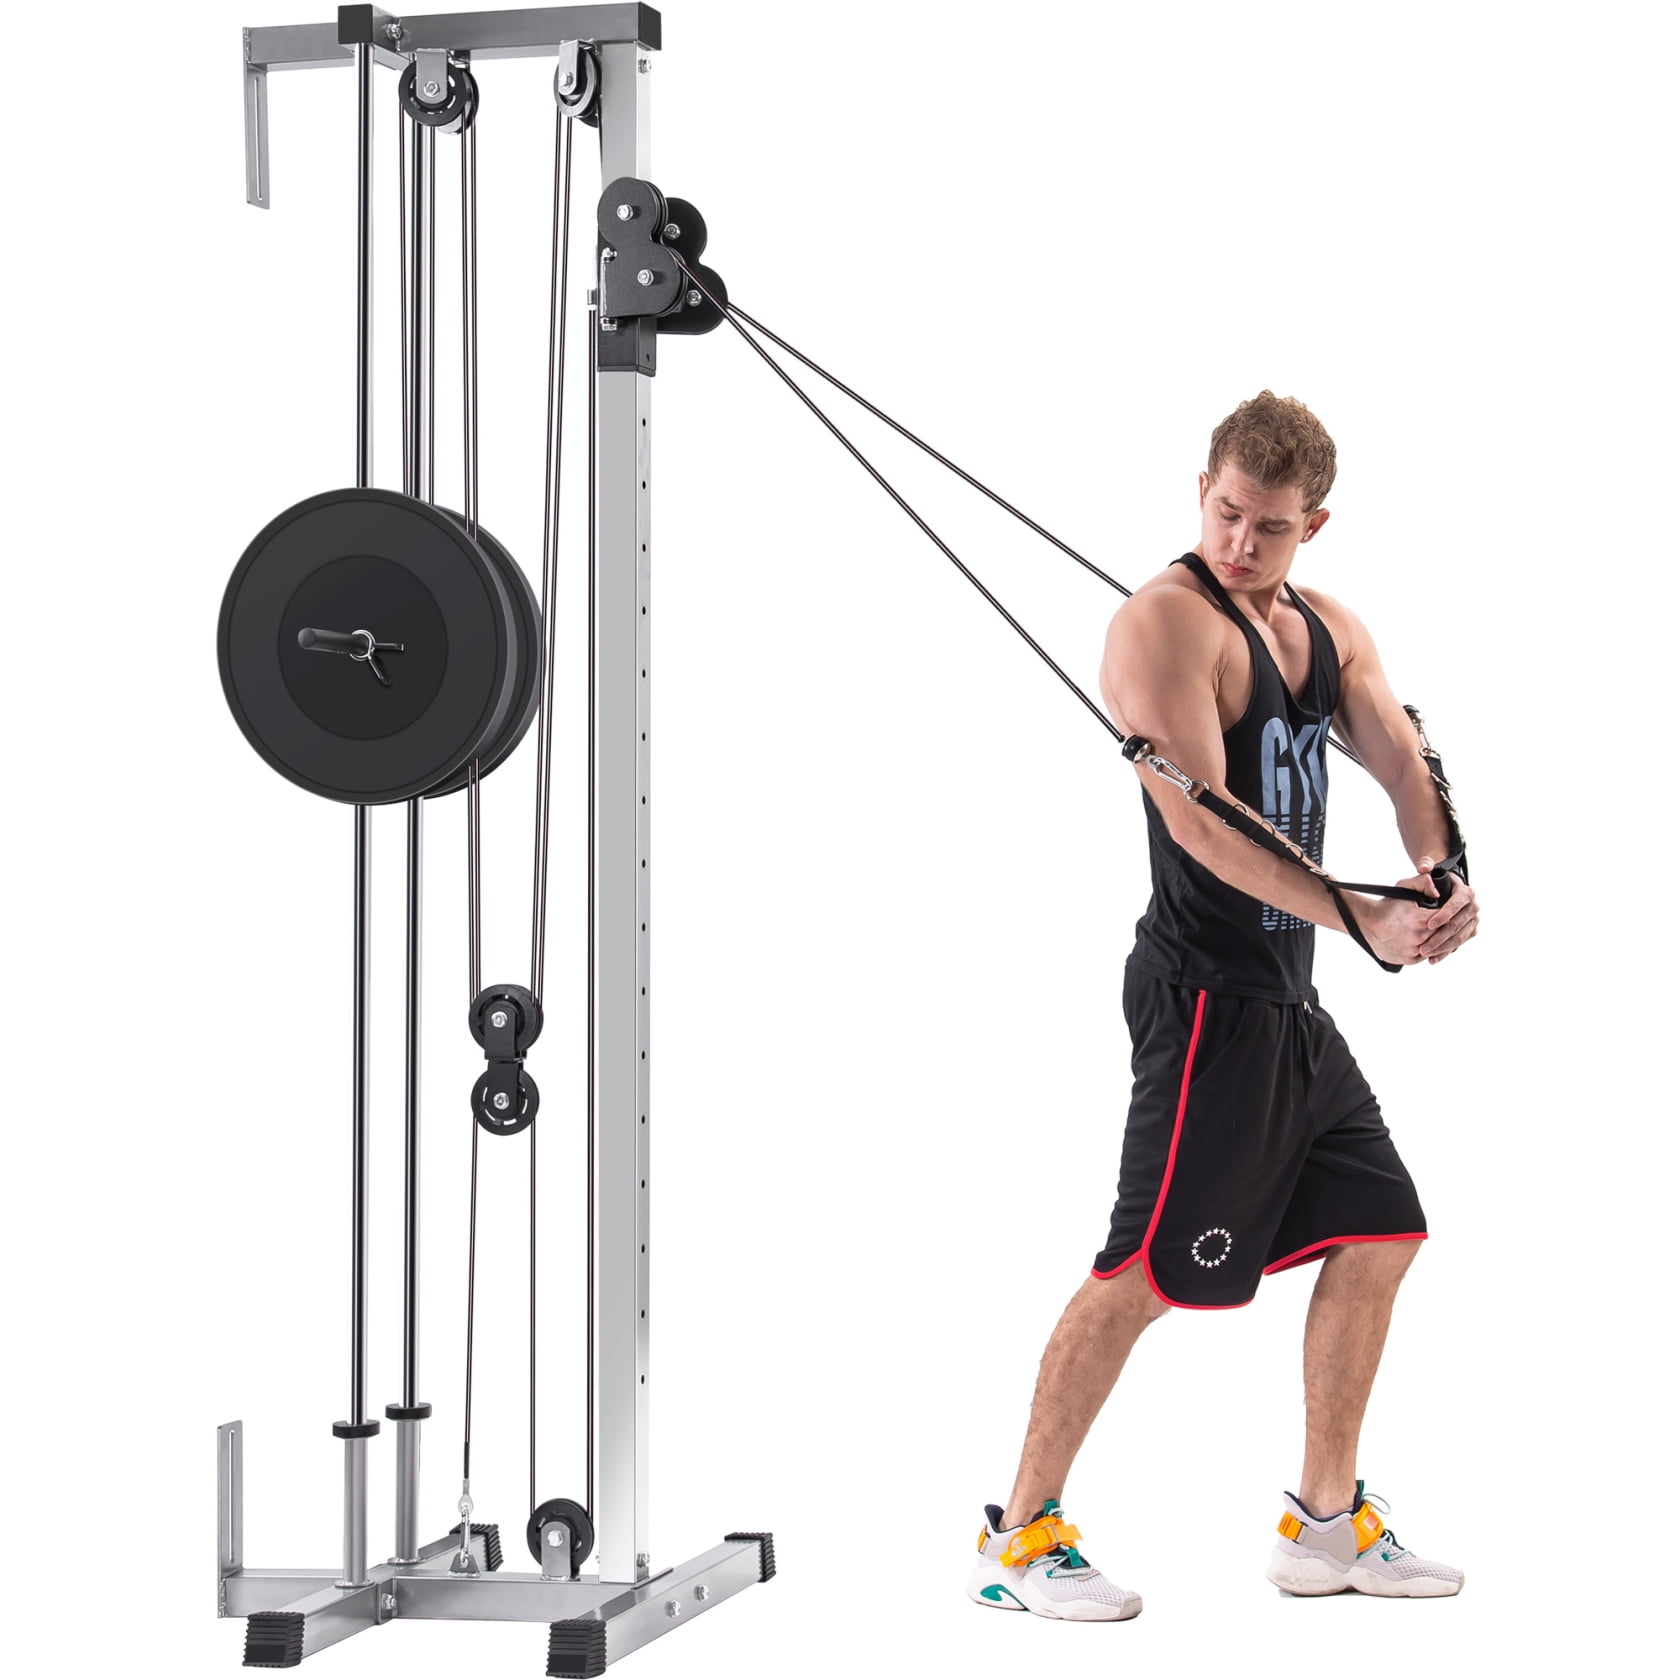 BOXERPOINT Complete Pulley System Gym for Home - 2 Pulleys with More  Fitness Accessories for Tricep, Bicep Exercises - Cable Machine Pully  Exercise Equipment - LAT Pull Down Weight Workout Set price